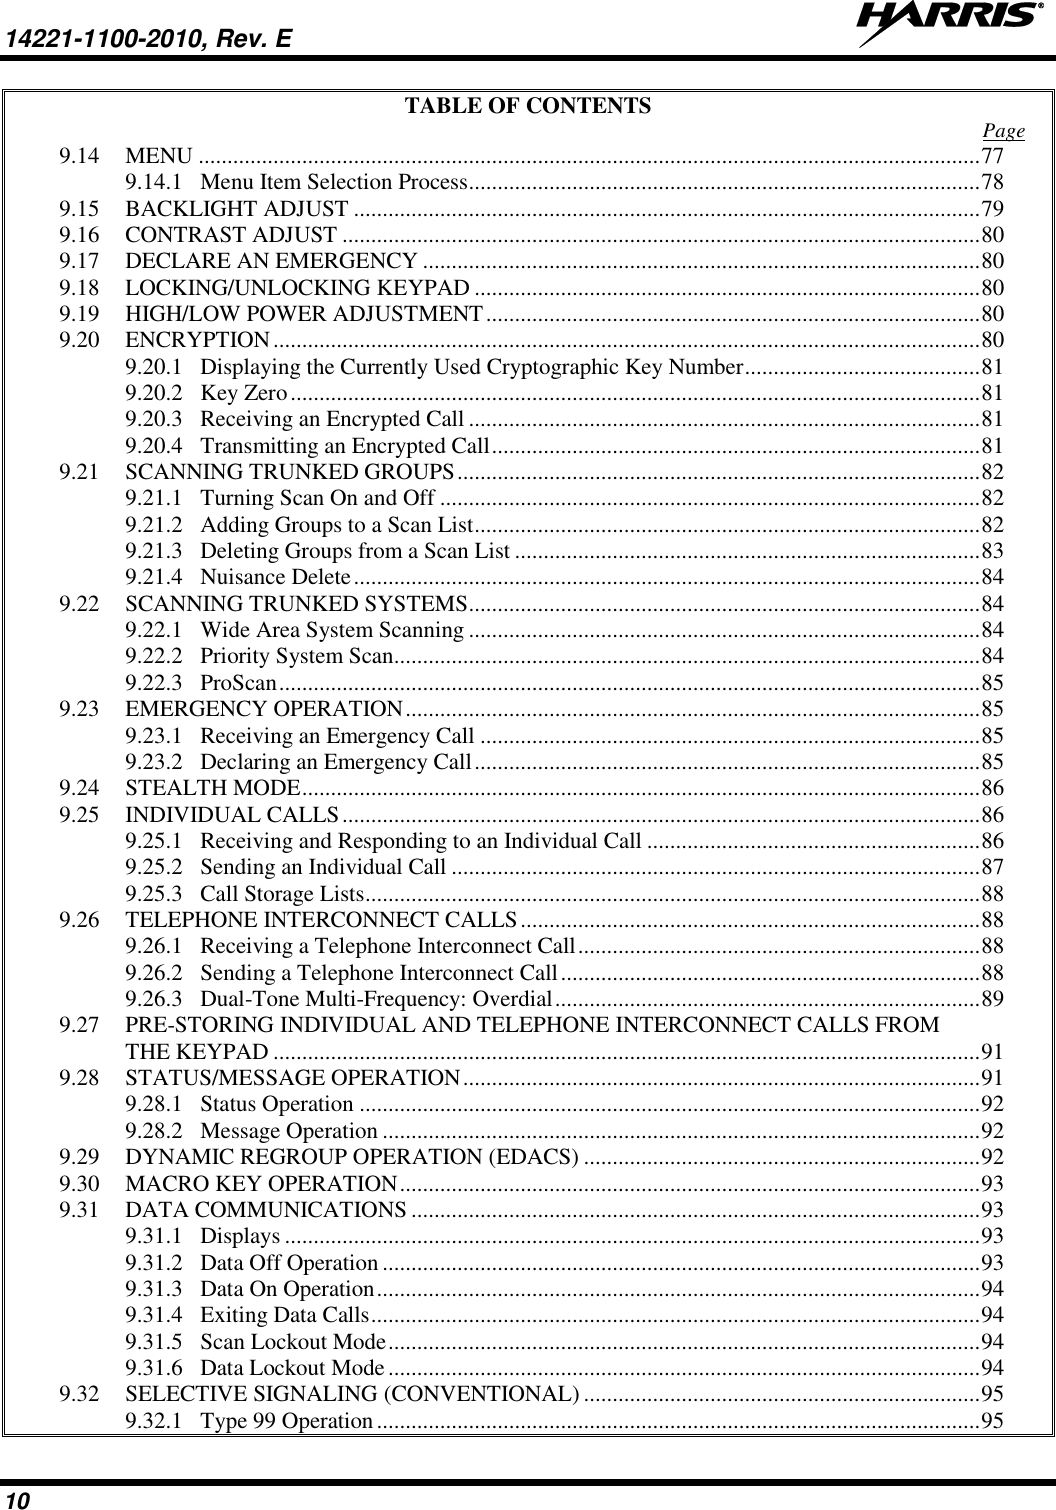 14221-1100-2010, Rev. E   10 TABLE OF CONTENTS  Page 9.14 MENU ........................................................................................................................................ 77 9.14.1 Menu Item Selection Process ......................................................................................... 78 9.15 BACKLIGHT ADJUST ............................................................................................................. 79 9.16 CONTRAST ADJUST ............................................................................................................... 80 9.17 DECLARE AN EMERGENCY ................................................................................................. 80 9.18 LOCKING/UNLOCKING KEYPAD ........................................................................................ 80 9.19 HIGH/LOW POWER ADJUSTMENT ...................................................................................... 80 9.20 ENCRYPTION ........................................................................................................................... 80 9.20.1 Displaying the Currently Used Cryptographic Key Number ......................................... 81 9.20.2 Key Zero ........................................................................................................................ 81 9.20.3 Receiving an Encrypted Call ......................................................................................... 81 9.20.4 Transmitting an Encrypted Call ..................................................................................... 81 9.21 SCANNING TRUNKED GROUPS ........................................................................................... 82 9.21.1 Turning Scan On and Off .............................................................................................. 82 9.21.2 Adding Groups to a Scan List ........................................................................................ 82 9.21.3 Deleting Groups from a Scan List ................................................................................. 83 9.21.4 Nuisance Delete ............................................................................................................. 84 9.22 SCANNING TRUNKED SYSTEMS ......................................................................................... 84 9.22.1 Wide Area System Scanning ......................................................................................... 84 9.22.2 Priority System Scan...................................................................................................... 84 9.22.3 ProScan .......................................................................................................................... 85 9.23 EMERGENCY OPERATION .................................................................................................... 85 9.23.1 Receiving an Emergency Call ....................................................................................... 85 9.23.2 Declaring an Emergency Call ........................................................................................ 85 9.24 STEALTH MODE ...................................................................................................................... 86 9.25 INDIVIDUAL CALLS ............................................................................................................... 86 9.25.1 Receiving and Responding to an Individual Call .......................................................... 86 9.25.2 Sending an Individual Call ............................................................................................ 87 9.25.3 Call Storage Lists ........................................................................................................... 88 9.26 TELEPHONE INTERCONNECT CALLS ................................................................................ 88 9.26.1 Receiving a Telephone Interconnect Call ...................................................................... 88 9.26.2 Sending a Telephone Interconnect Call ......................................................................... 88 9.26.3 Dual-Tone Multi-Frequency: Overdial .......................................................................... 89 9.27 PRE-STORING INDIVIDUAL AND TELEPHONE INTERCONNECT CALLS FROM THE KEYPAD ........................................................................................................................... 91 9.28 STATUS/MESSAGE OPERATION .......................................................................................... 91 9.28.1 Status Operation ............................................................................................................ 92 9.28.2 Message Operation ........................................................................................................ 92 9.29 DYNAMIC REGROUP OPERATION (EDACS) ..................................................................... 92 9.30 MACRO KEY OPERATION ..................................................................................................... 93 9.31 DATA COMMUNICATIONS ................................................................................................... 93 9.31.1 Displays ......................................................................................................................... 93 9.31.2 Data Off Operation ........................................................................................................ 93 9.31.3 Data On Operation ......................................................................................................... 94 9.31.4 Exiting Data Calls .......................................................................................................... 94 9.31.5 Scan Lockout Mode ....................................................................................................... 94 9.31.6 Data Lockout Mode ....................................................................................................... 94 9.32 SELECTIVE SIGNALING (CONVENTIONAL) ..................................................................... 95 9.32.1 Type 99 Operation ......................................................................................................... 95 